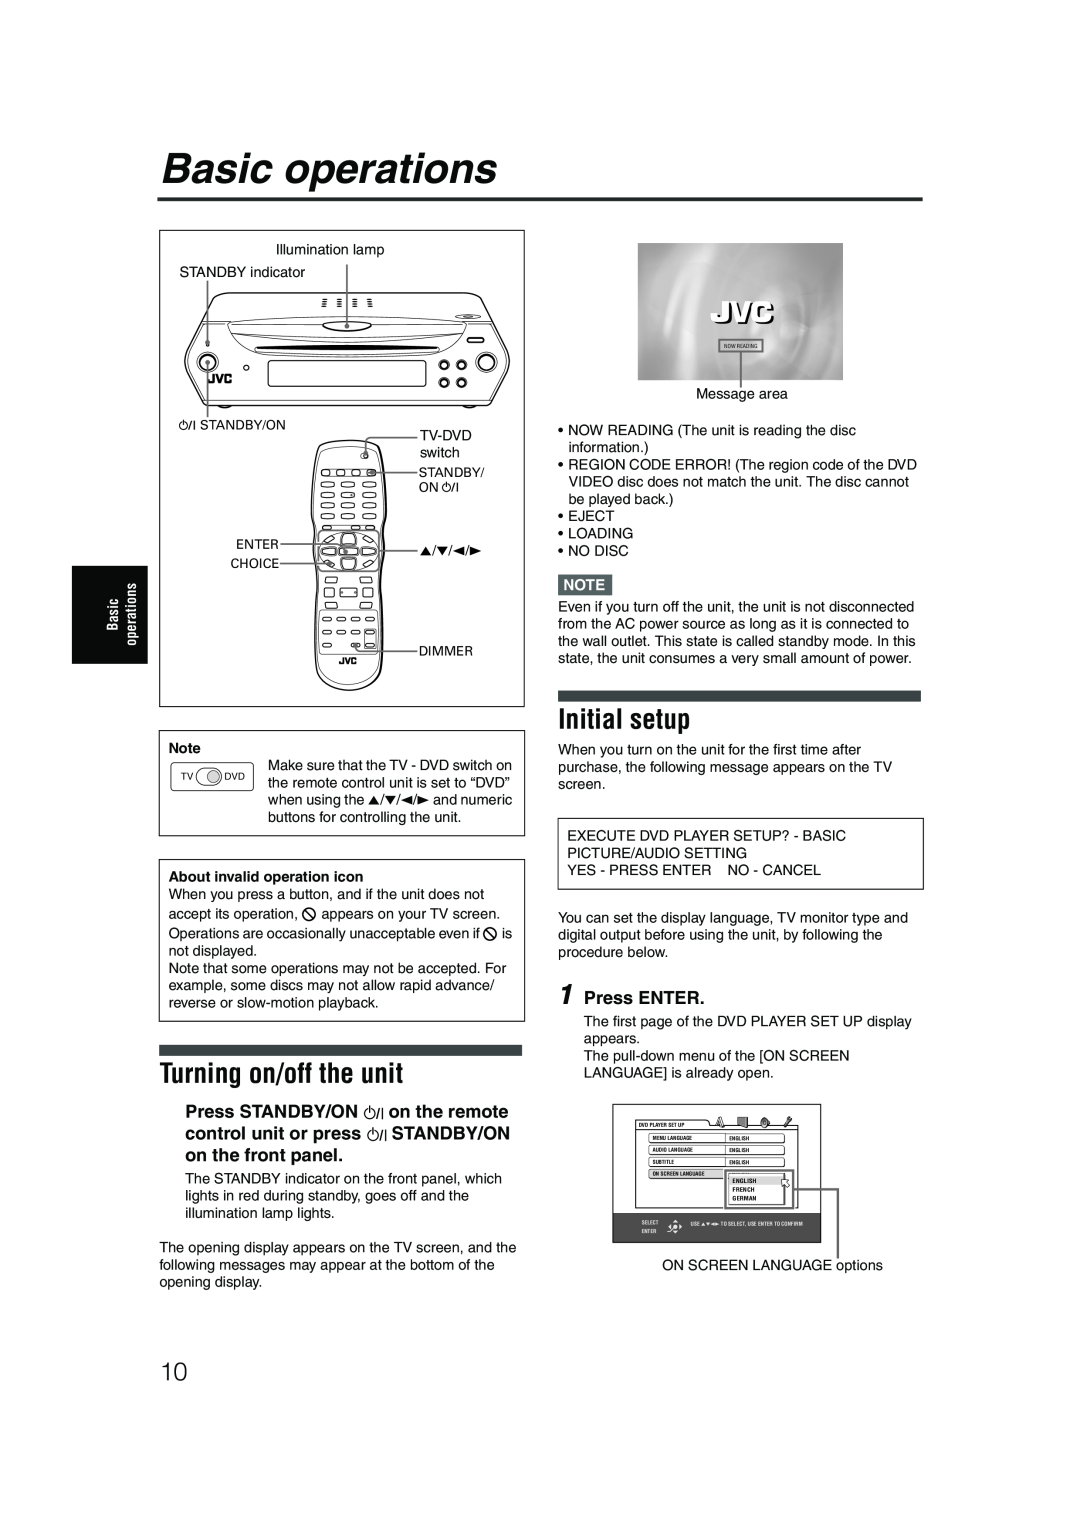 JVC LET0227-003A manual Basic operations, Turning on/off the unit, Initial setup, Press ENTER 